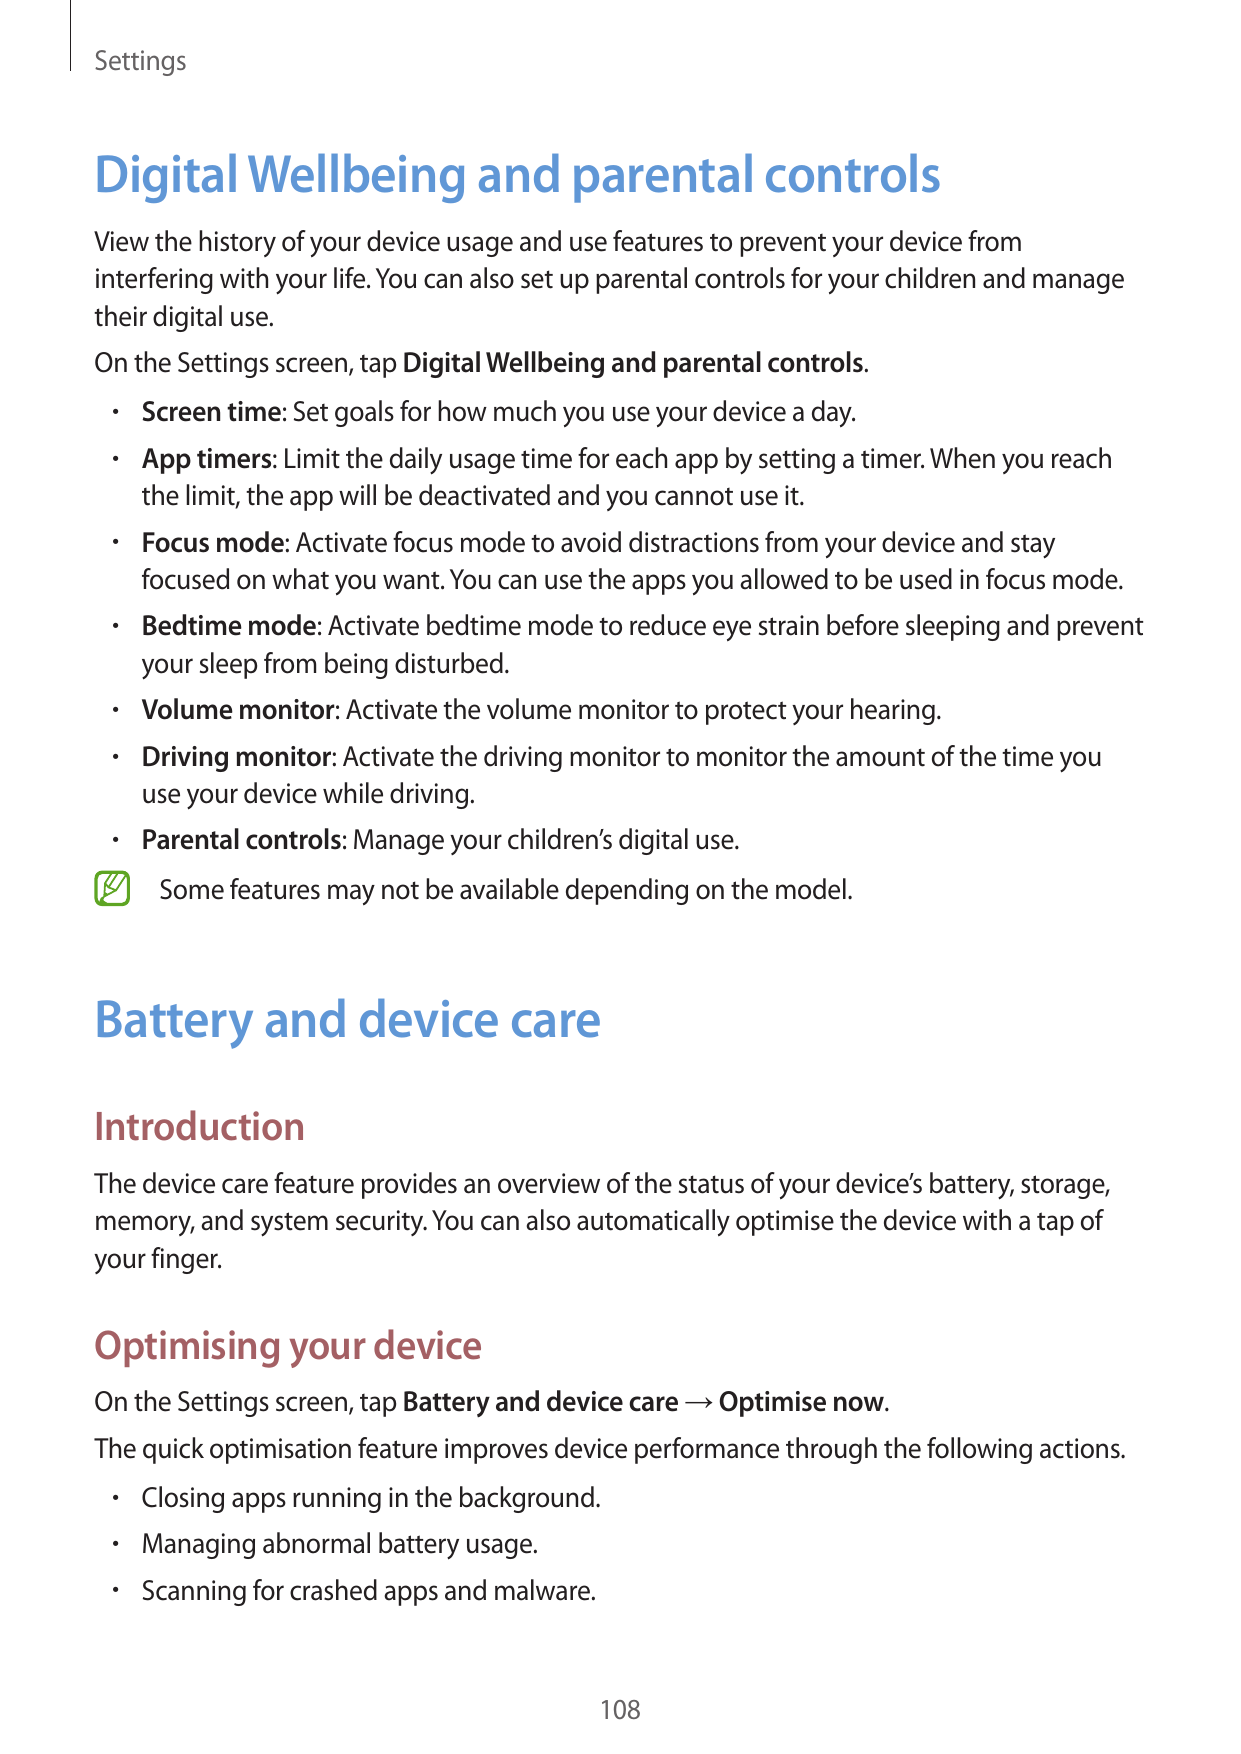 SettingsDigital Wellbeing and parental controlsView the history of your device usage and use features to prevent your device fro